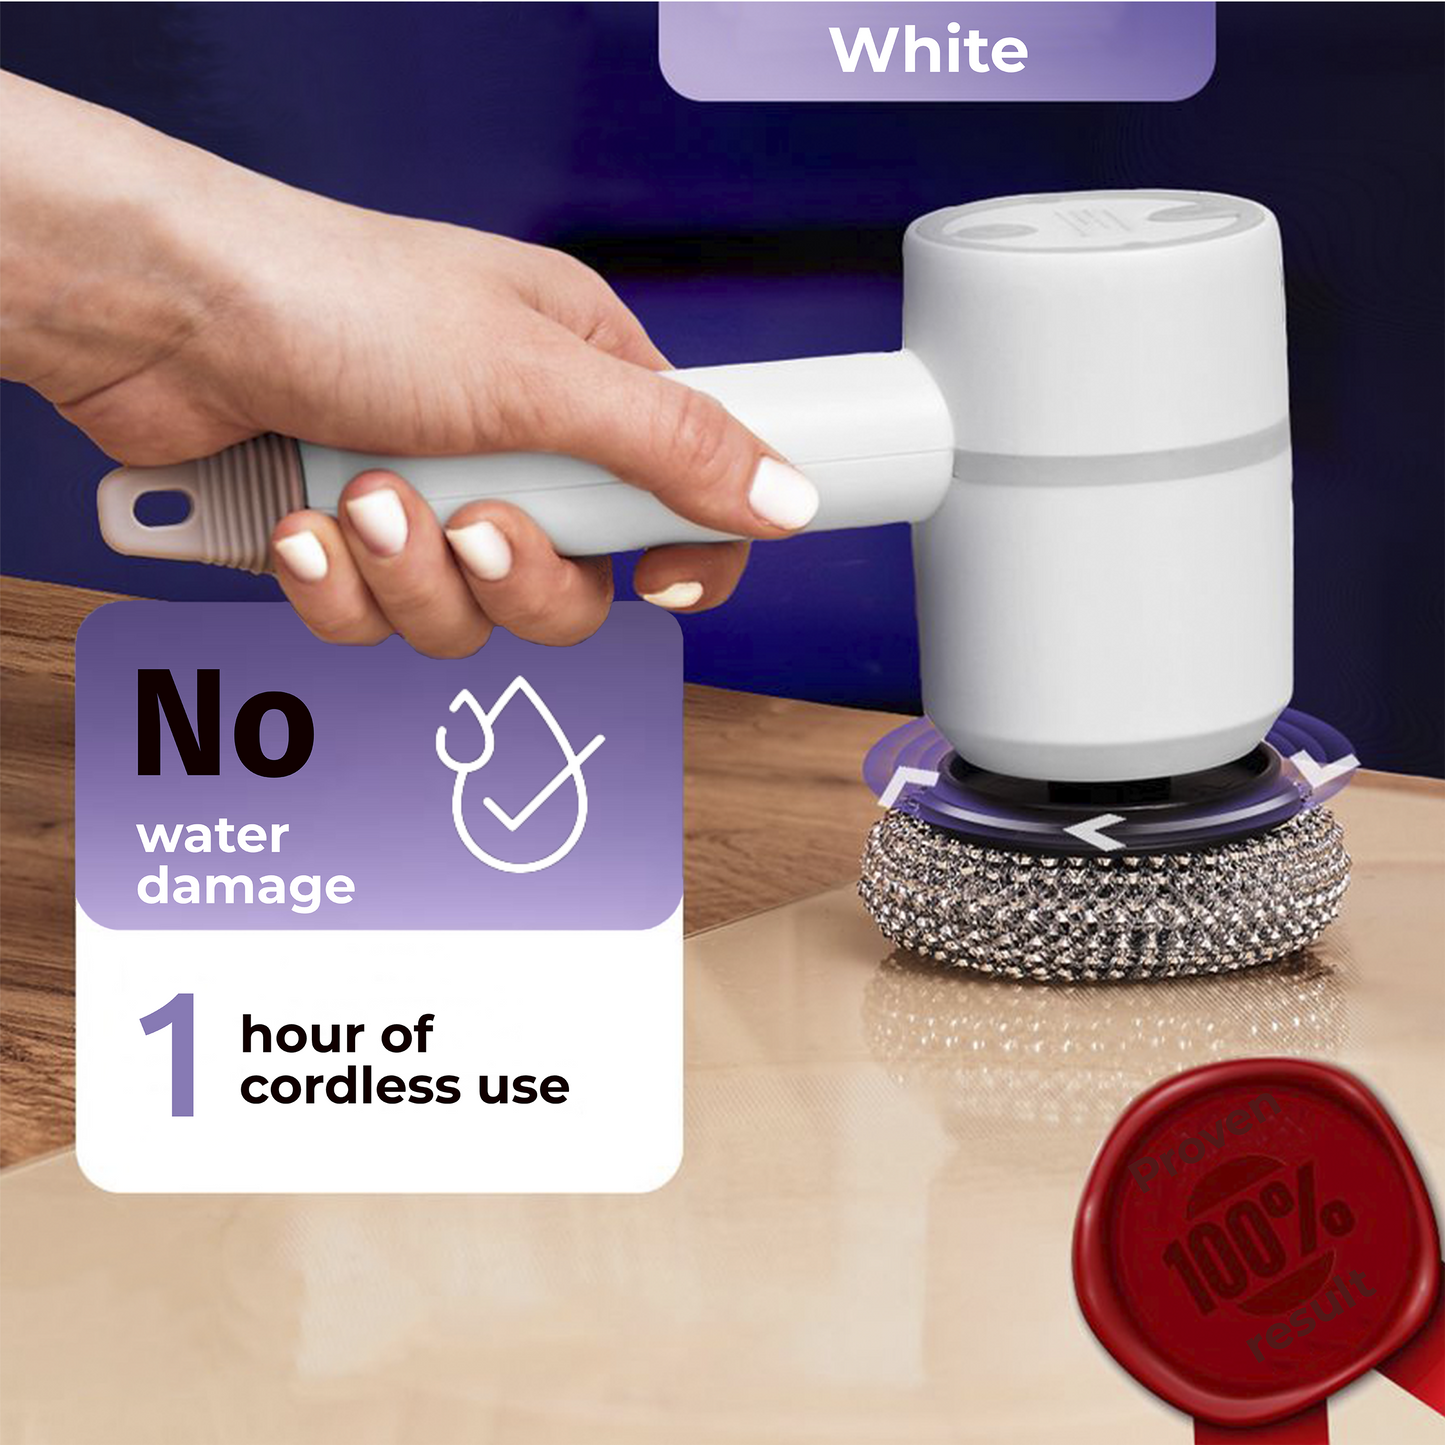 "White SpotLess scrubber showcased with water-resistant features and one hour of cordless operation, ideal for effective, sustained cleaning"